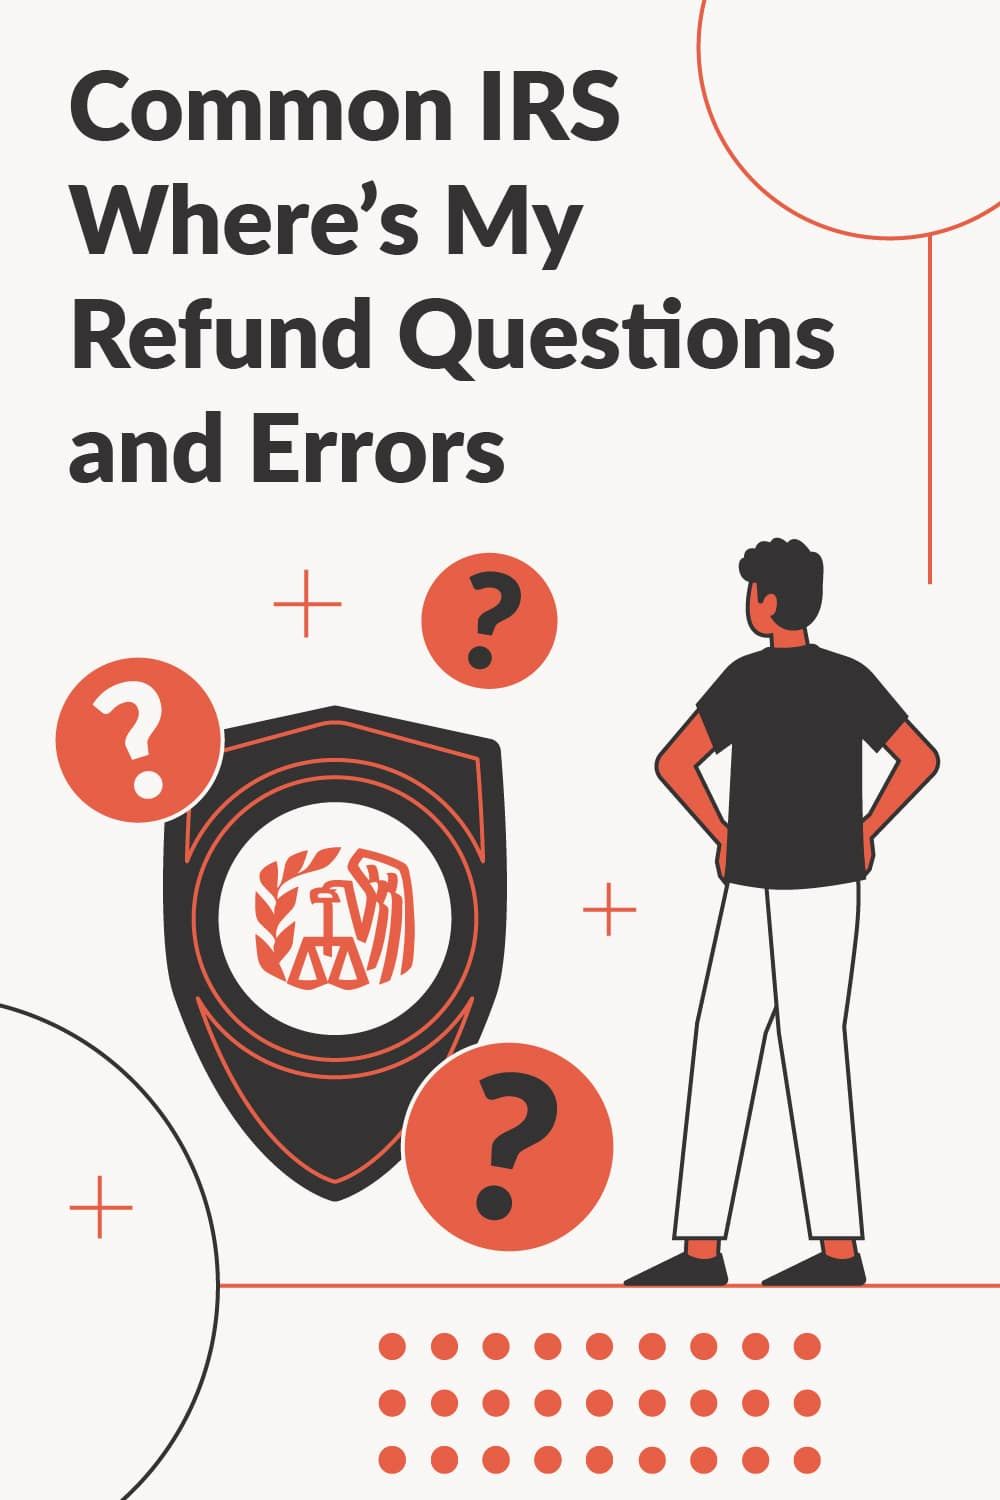 Common IRS Where’s My Refund Questions and Errors